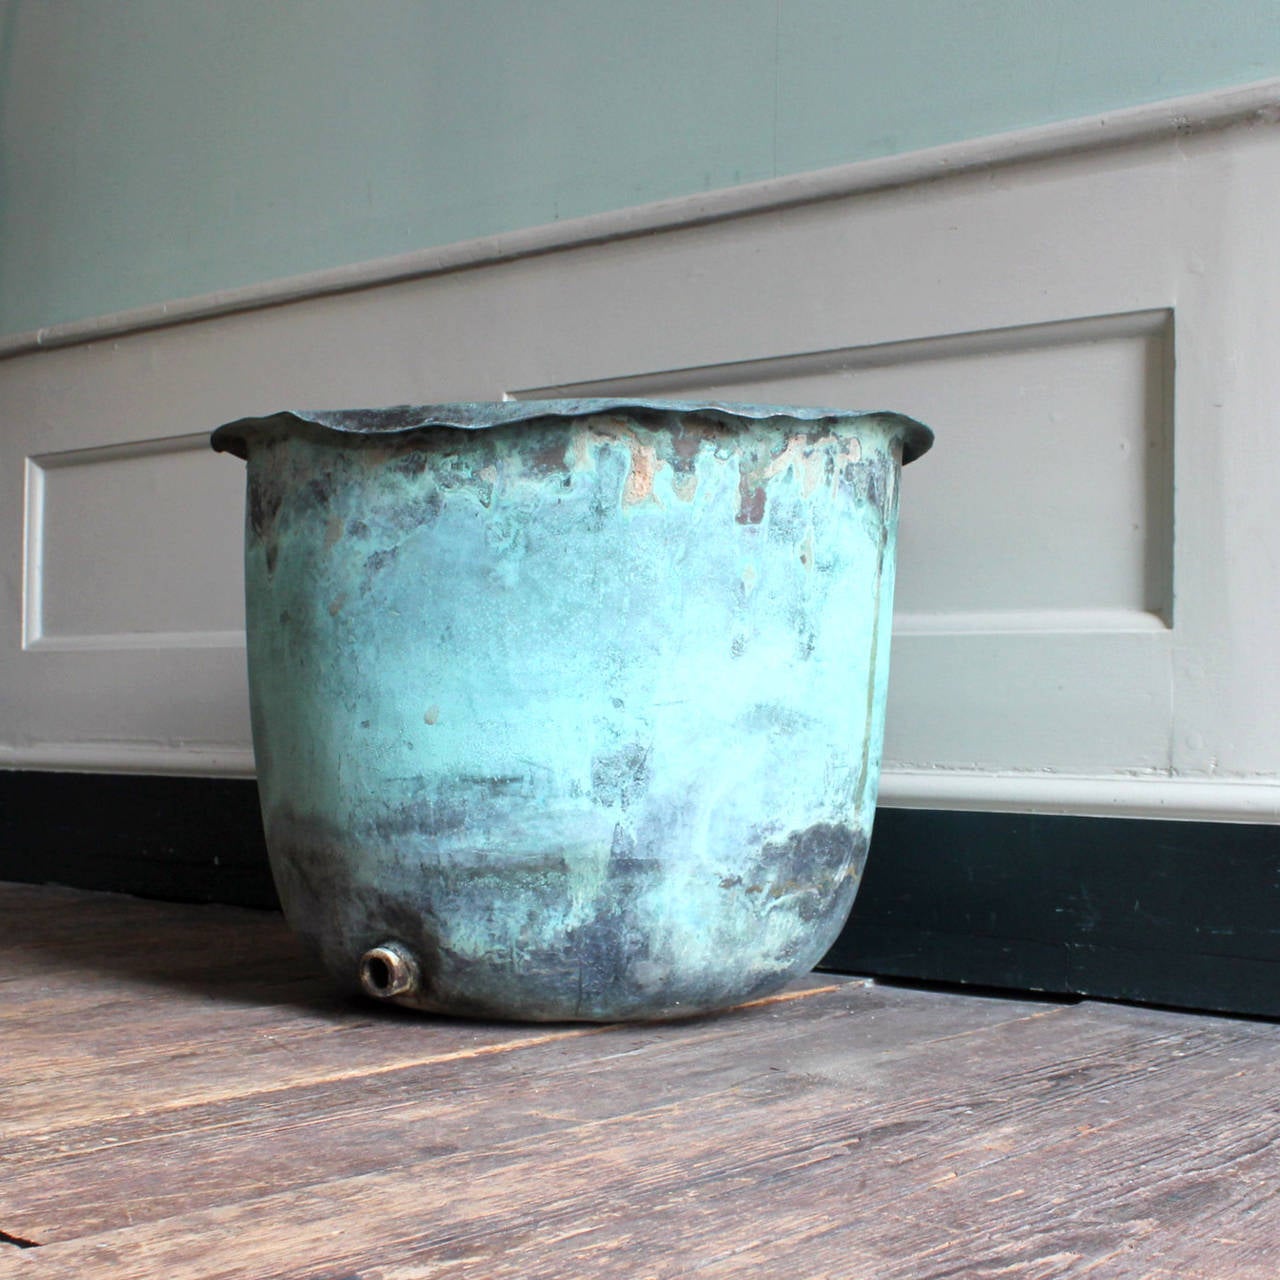 A nineteenth century copper, with outlet at base, excellent verdigris patination.

Available to view at Brunswick House, London.

Diameter 55cm, height 48cm.